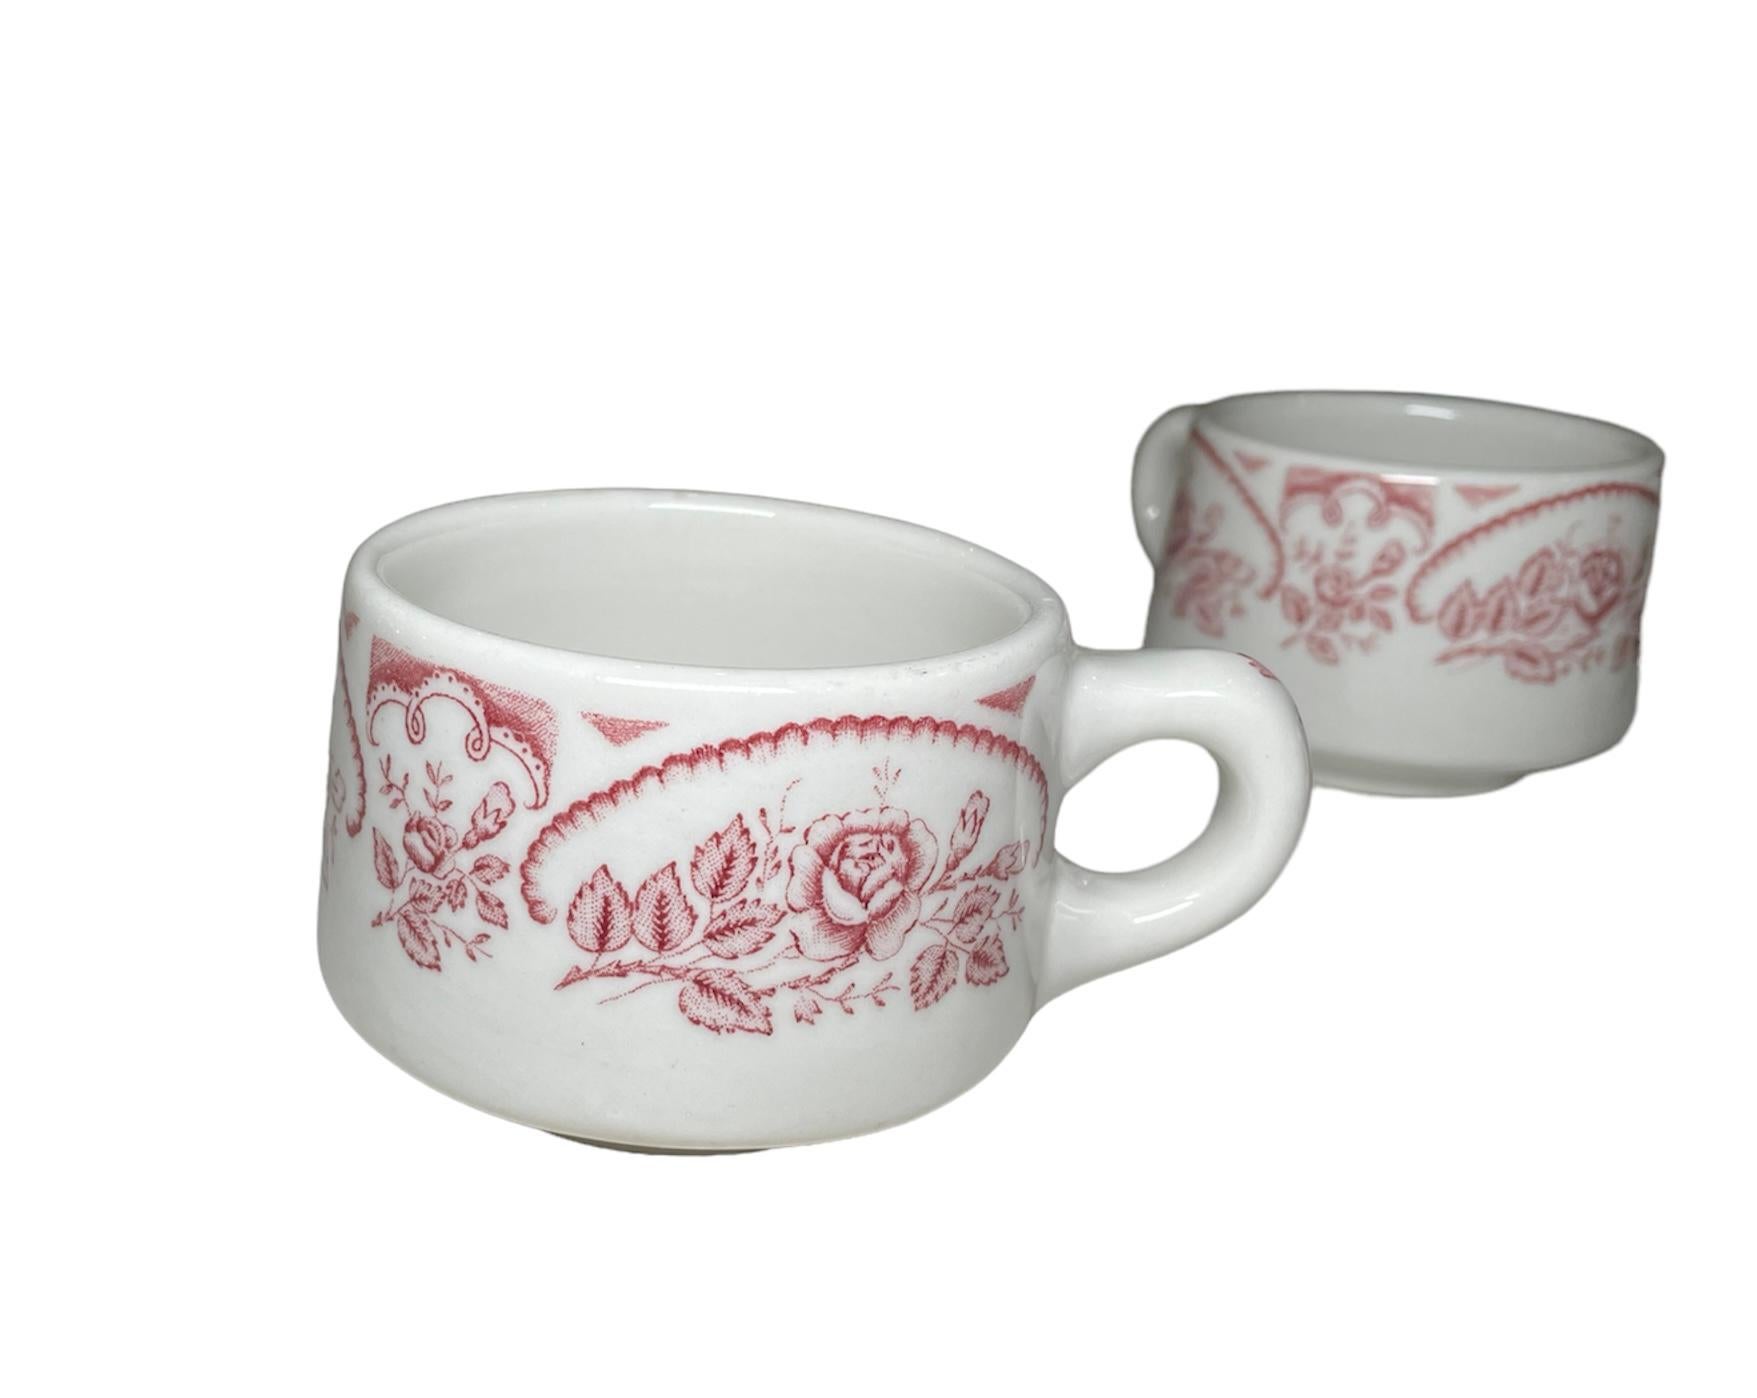 This is a set of four Caribe China coffee/hot chocolate cup. It depicts a heavy and round white cups hand painted cranberry color with little bouquets of roses around them. The bouquets are semi framed with scalloped borders of the same color. Also,